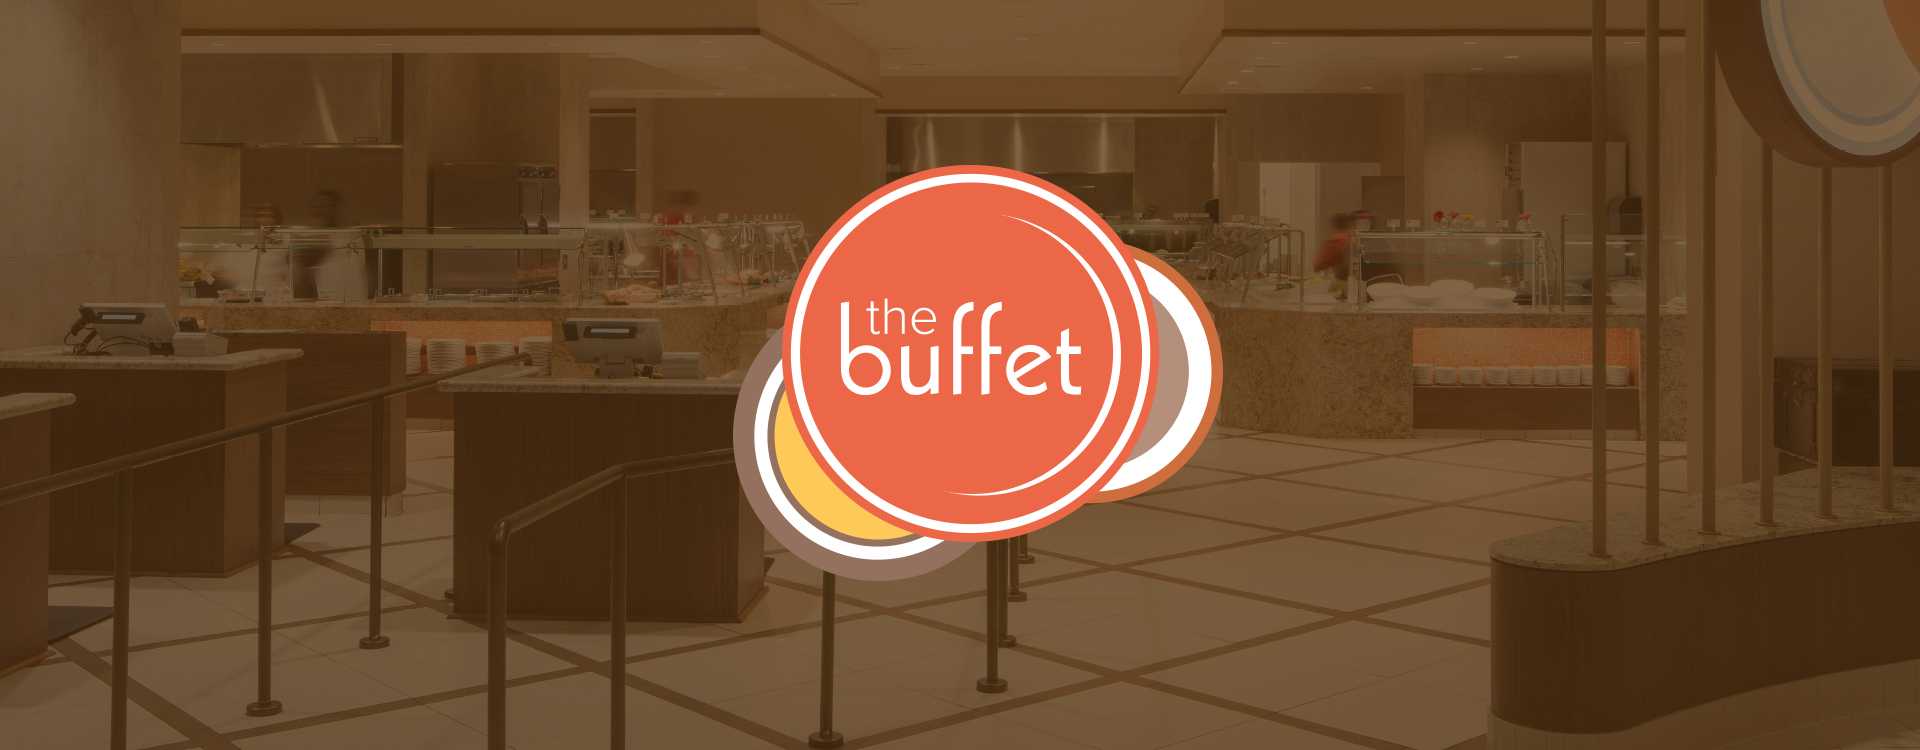 phone number for chumash casino buffet